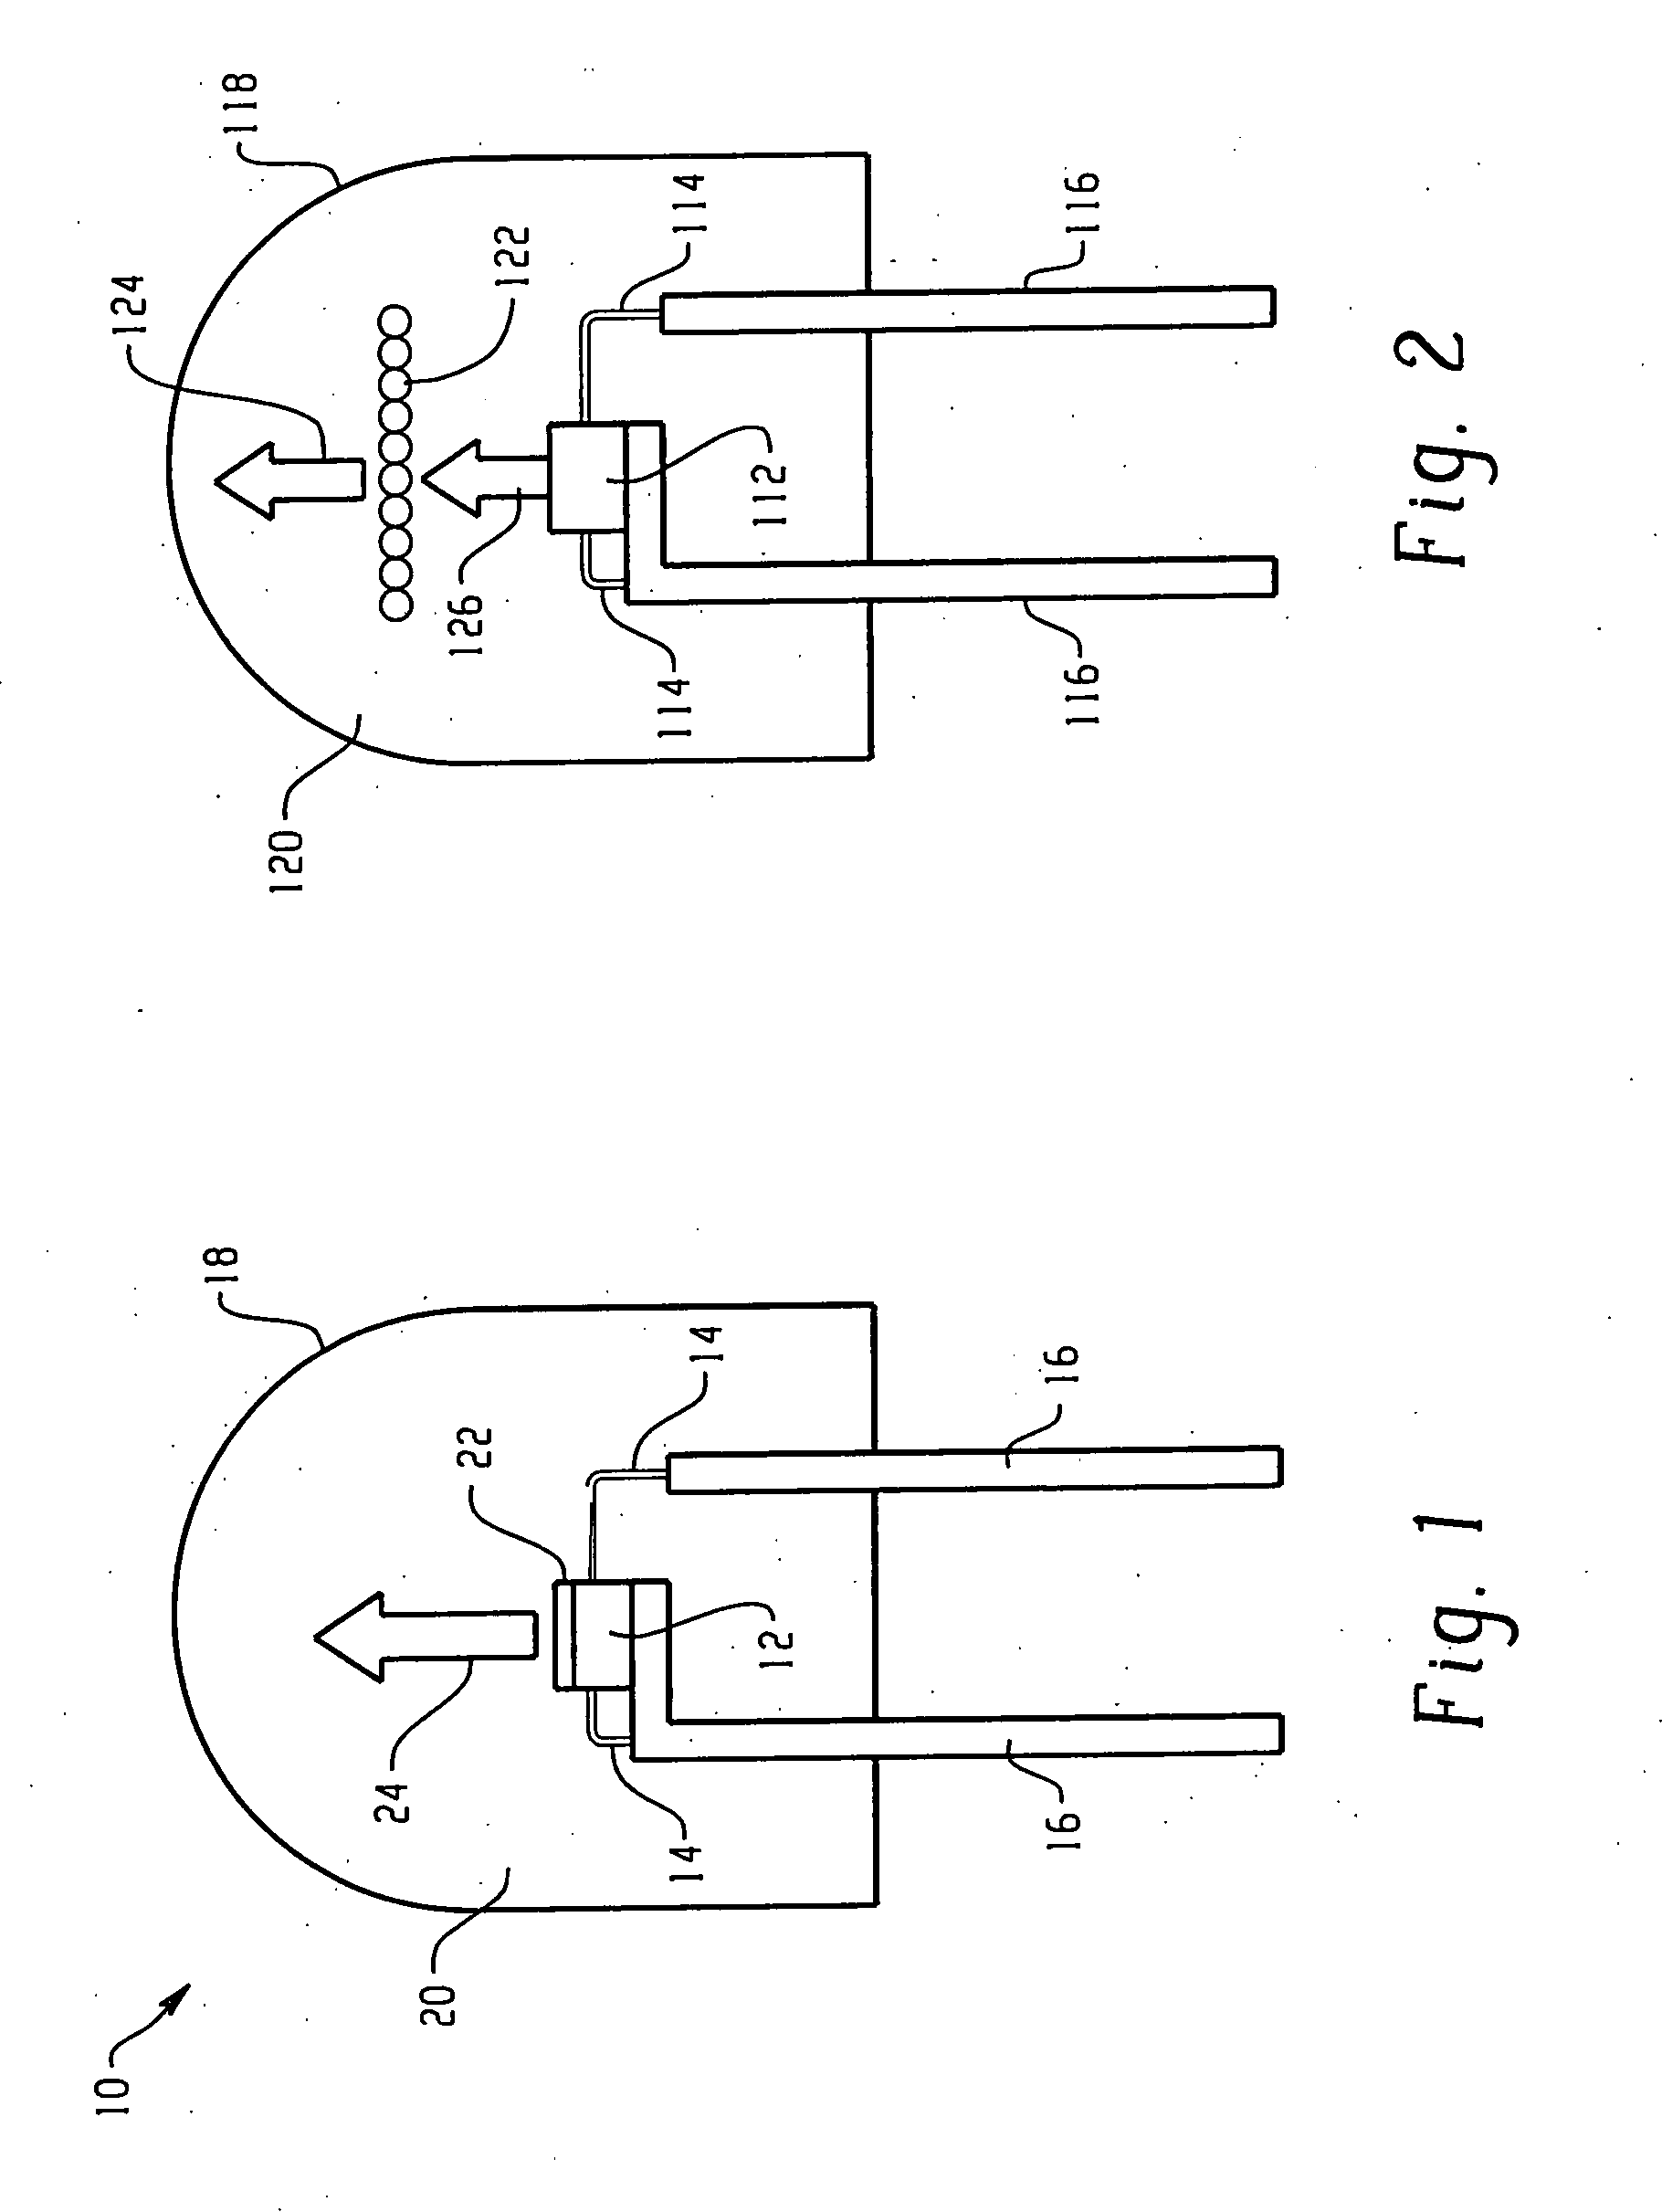 Red line emitting phosphors for use in LED applications